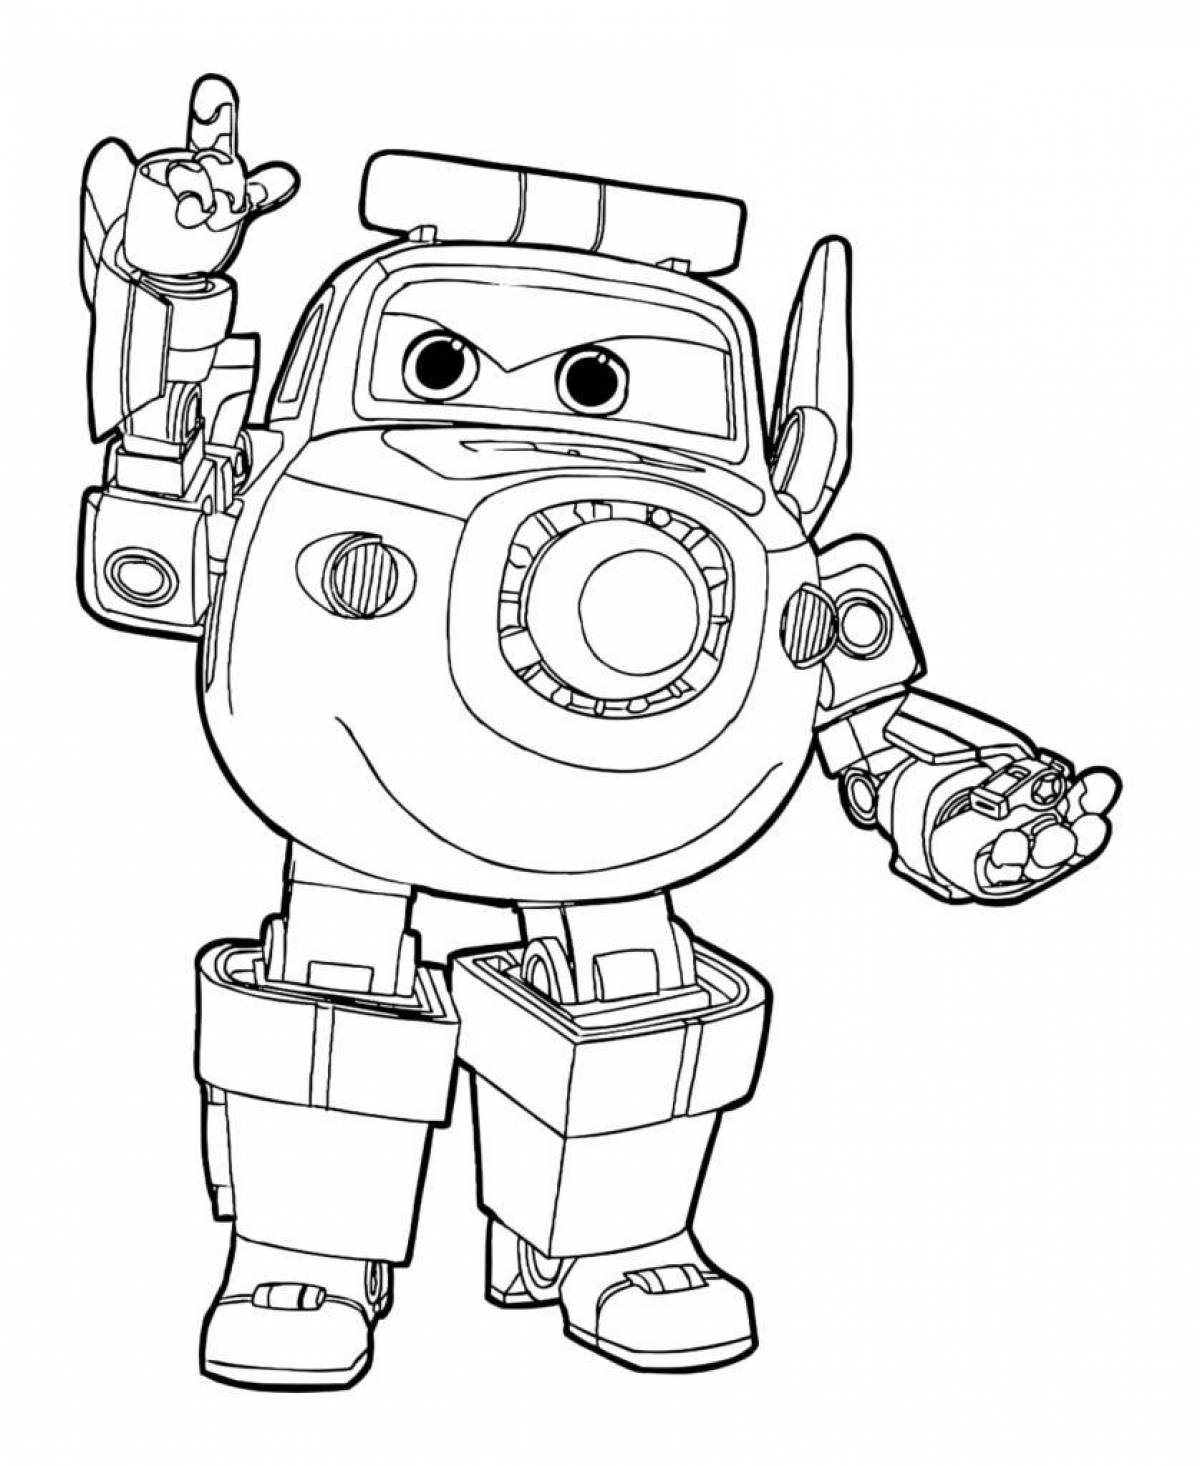 Amazing police robot coloring page